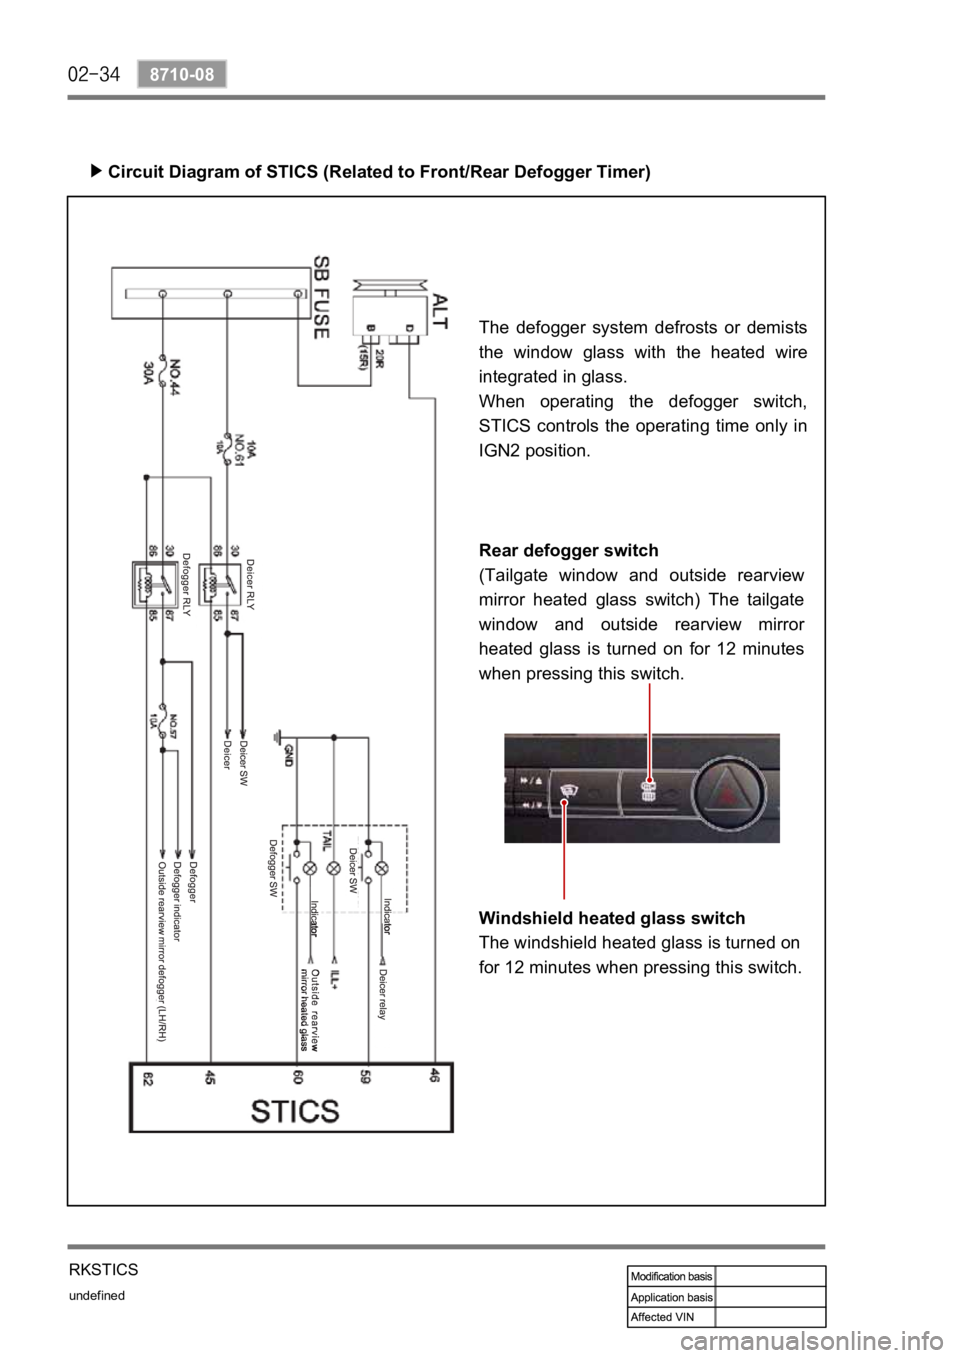 SSANGYONG REXTON 2006  Service Manual undefined
8710-08
RKSTICS
Circuit Diagram of STICS (Related to Front/Rear Defogger Timer)
The  defogger  system  defrosts  or  demists 
the  window  glass  with  the  heated  wire 
integrated in glass